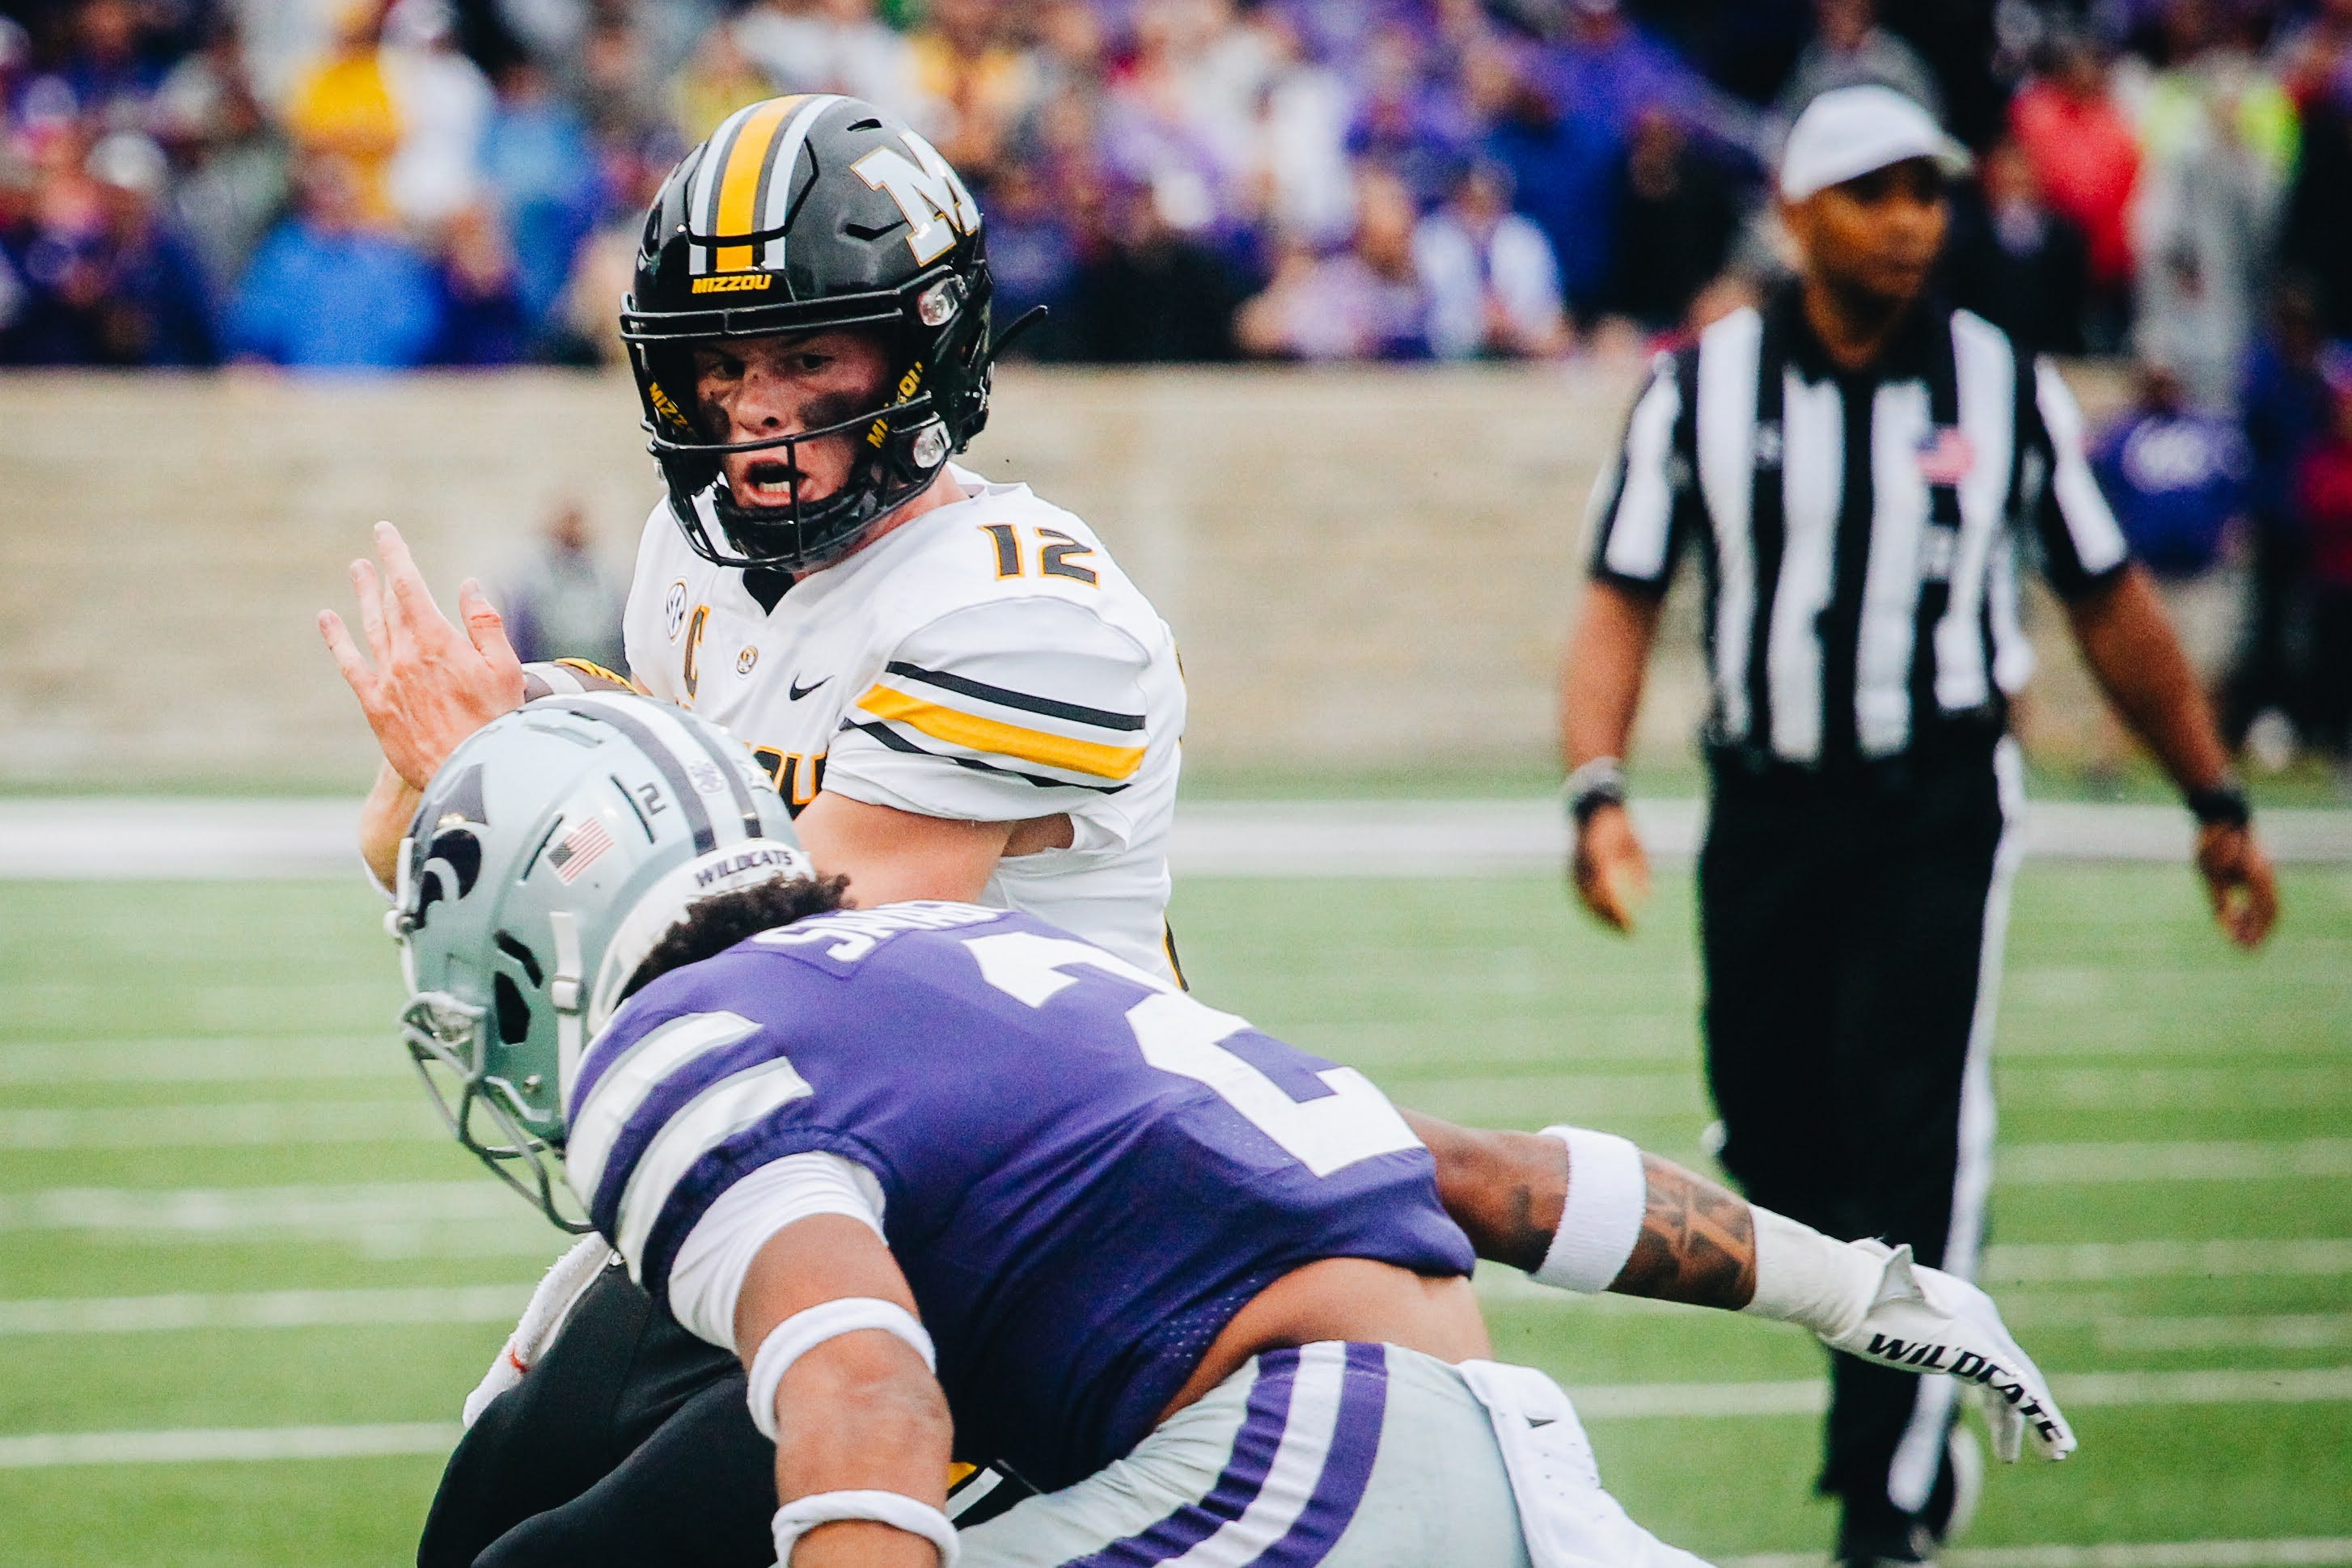 Missouri football vs. Kansas State live updates Can the Tigers pull